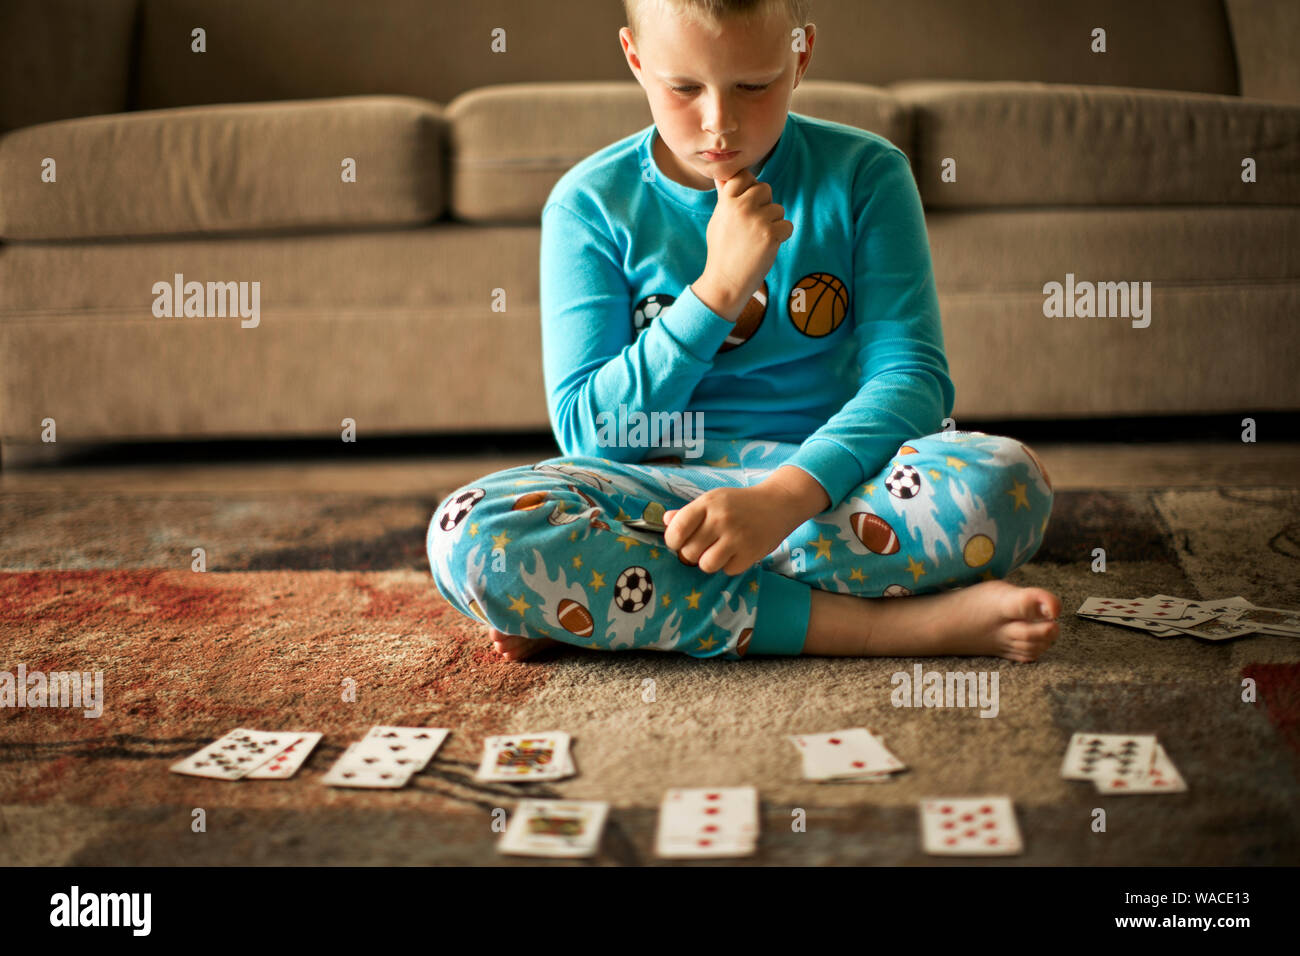 Young boy playing a card game. Stock Photo